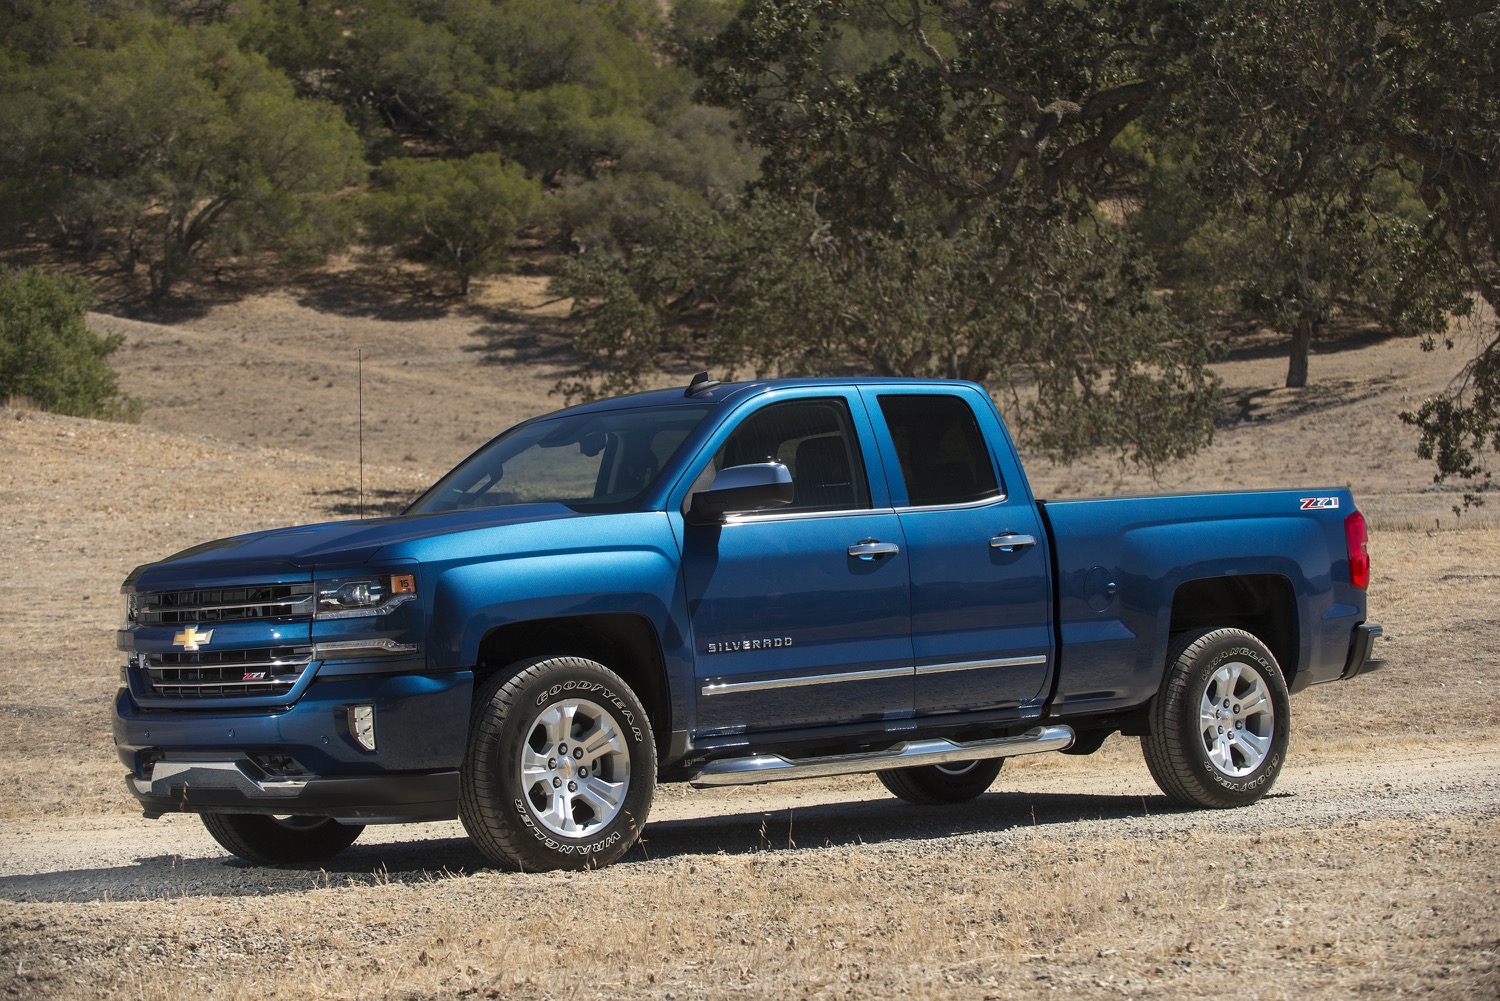 Stop the shuddering on a 2016 GMC Sierra / Silverado with the 8L90